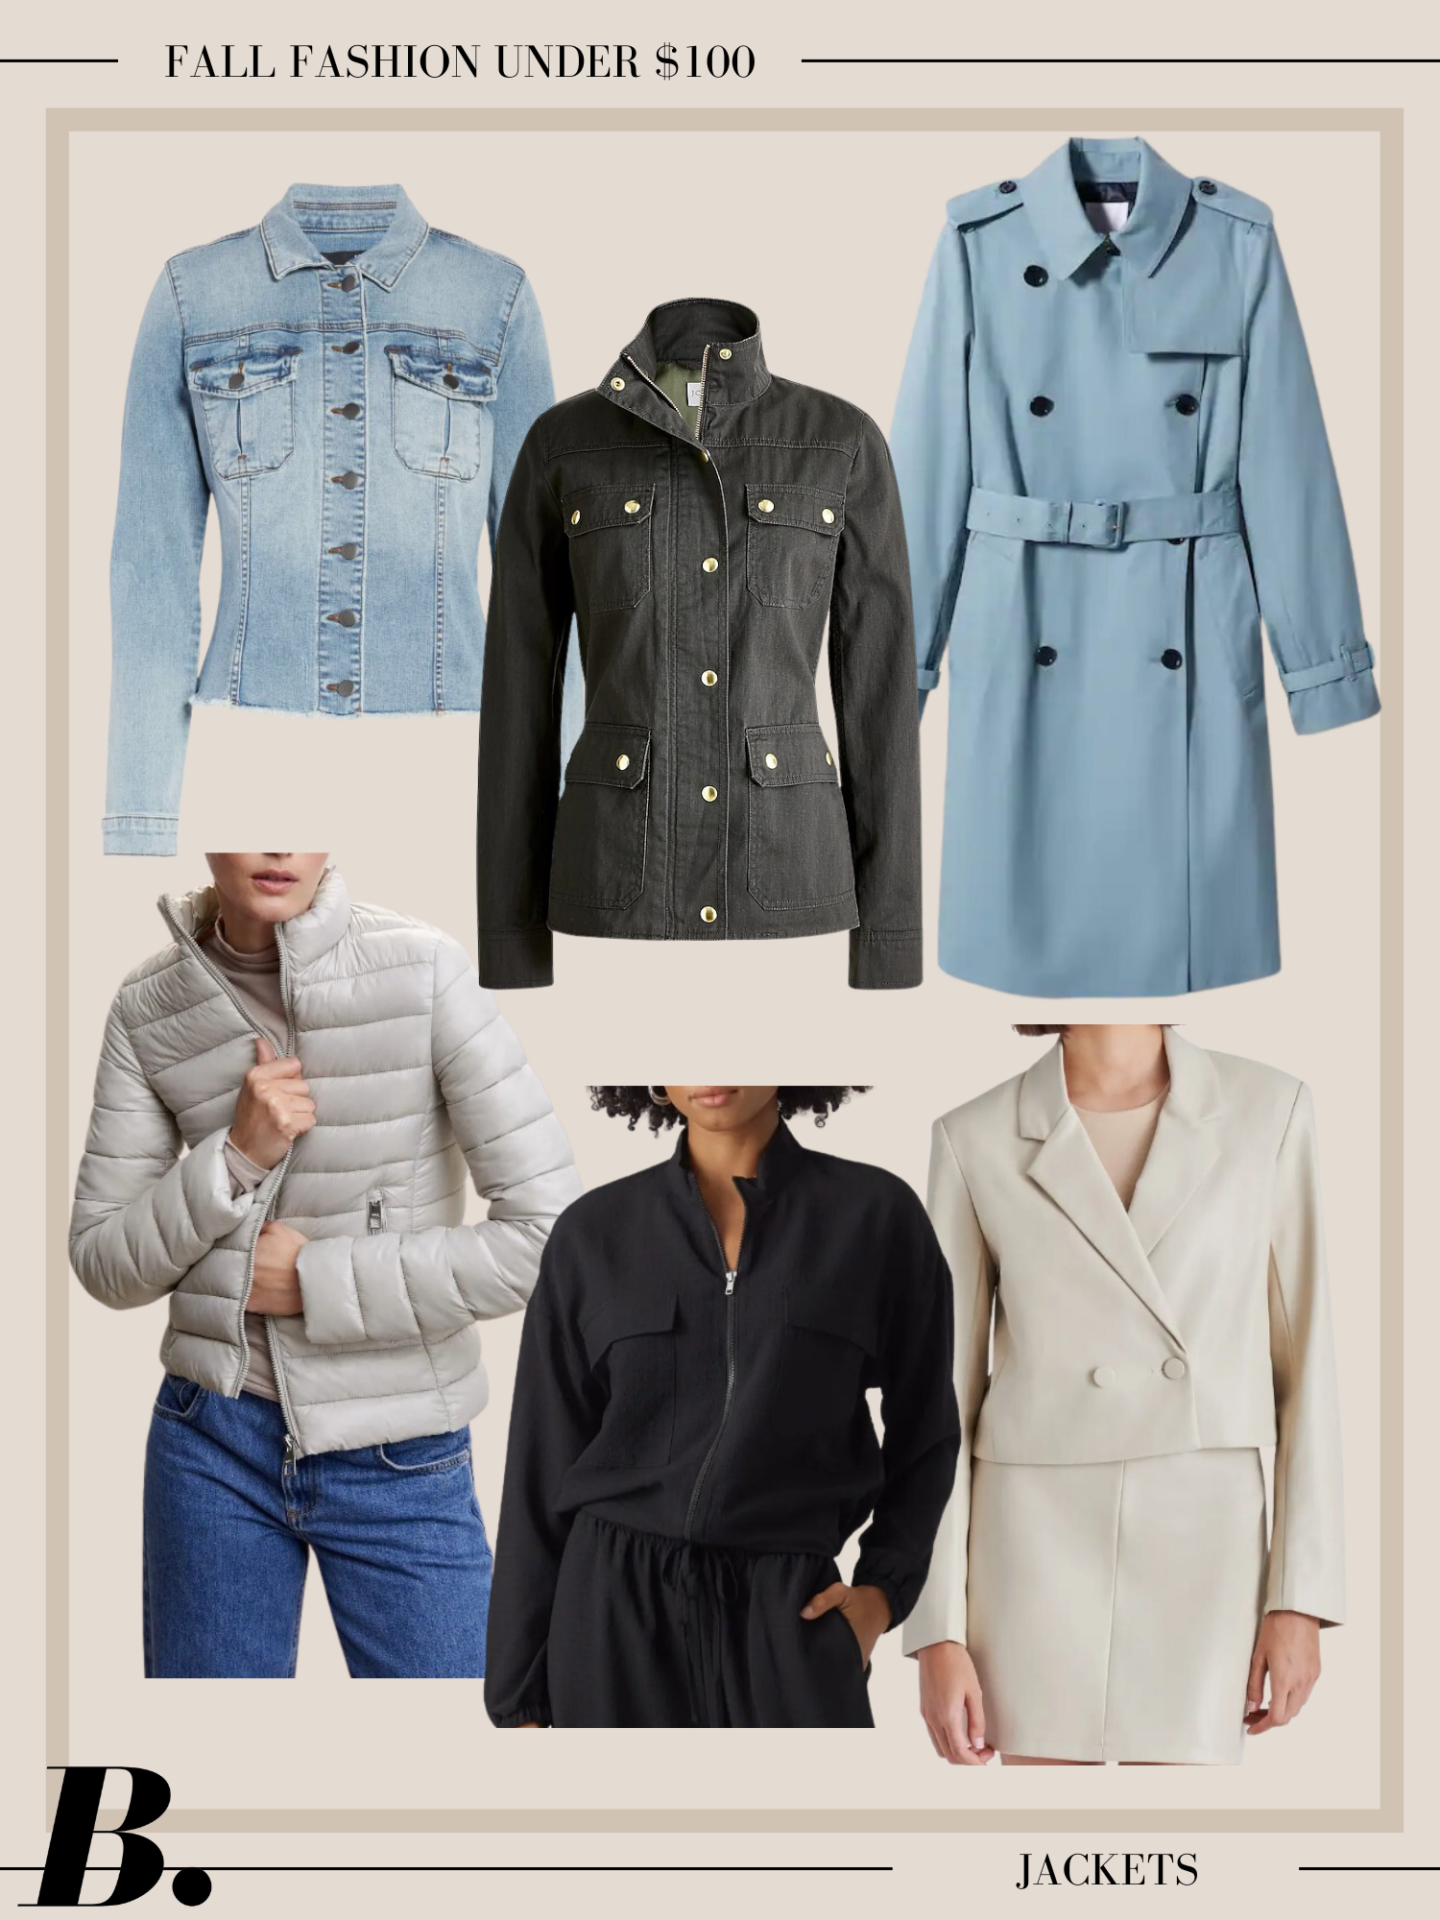 Fall fashion under $100, affordable fall fashion finds, fall fashion favorites for women, fall outfits, fall sweaters, fall tops, best jeans for fall, wide-leg trousers, denim midi skirt, best fall boots and booties, fall accessories, fall jackets, affordable fall jackets, lady jackets, Erin Busbee, Busbee Style, Fashion Over 40, Telluride, CO